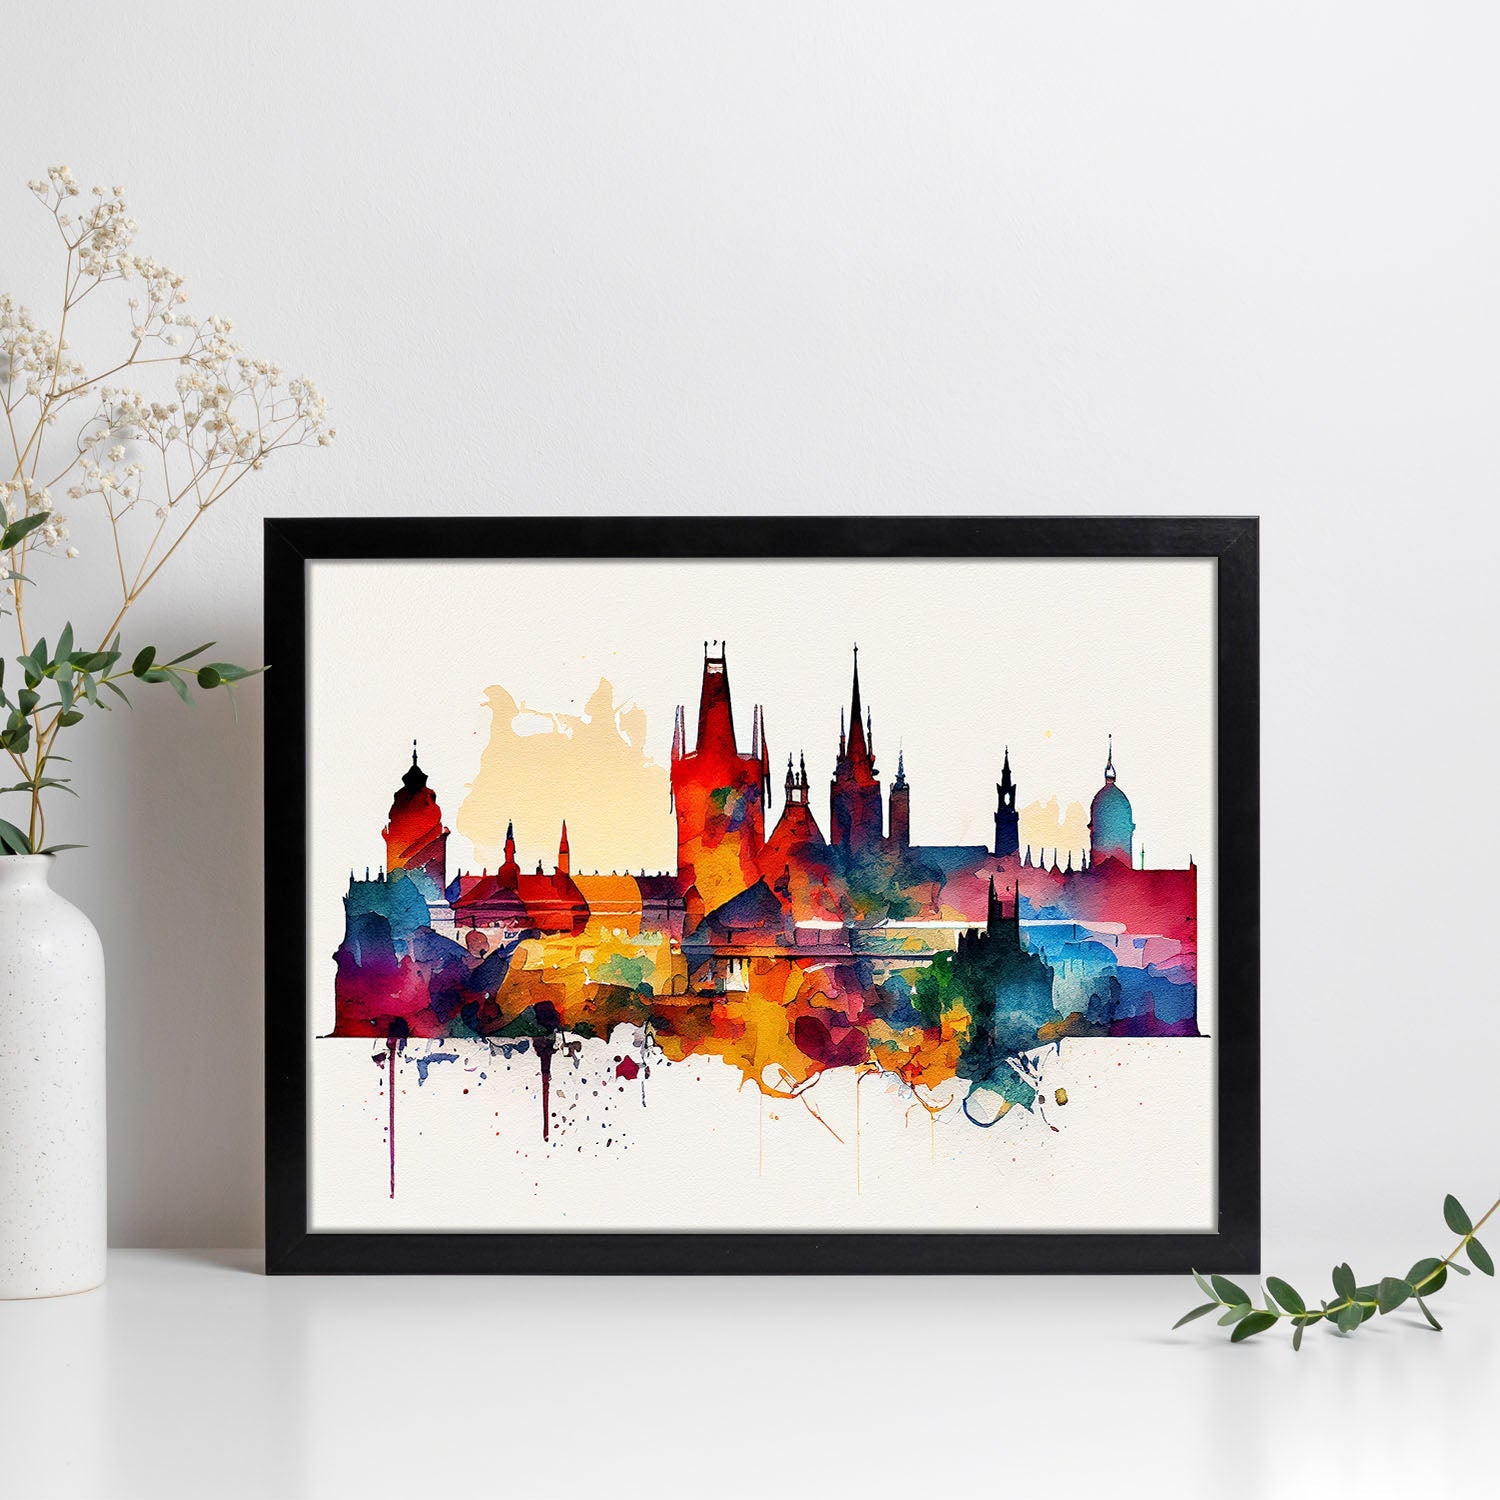 Nacnic watercolor of a skyline of the city of Prague_3. Aesthetic Wall Art Prints for Bedroom or Living Room Design.-Artwork-Nacnic-A4-Sin Marco-Nacnic Estudio SL